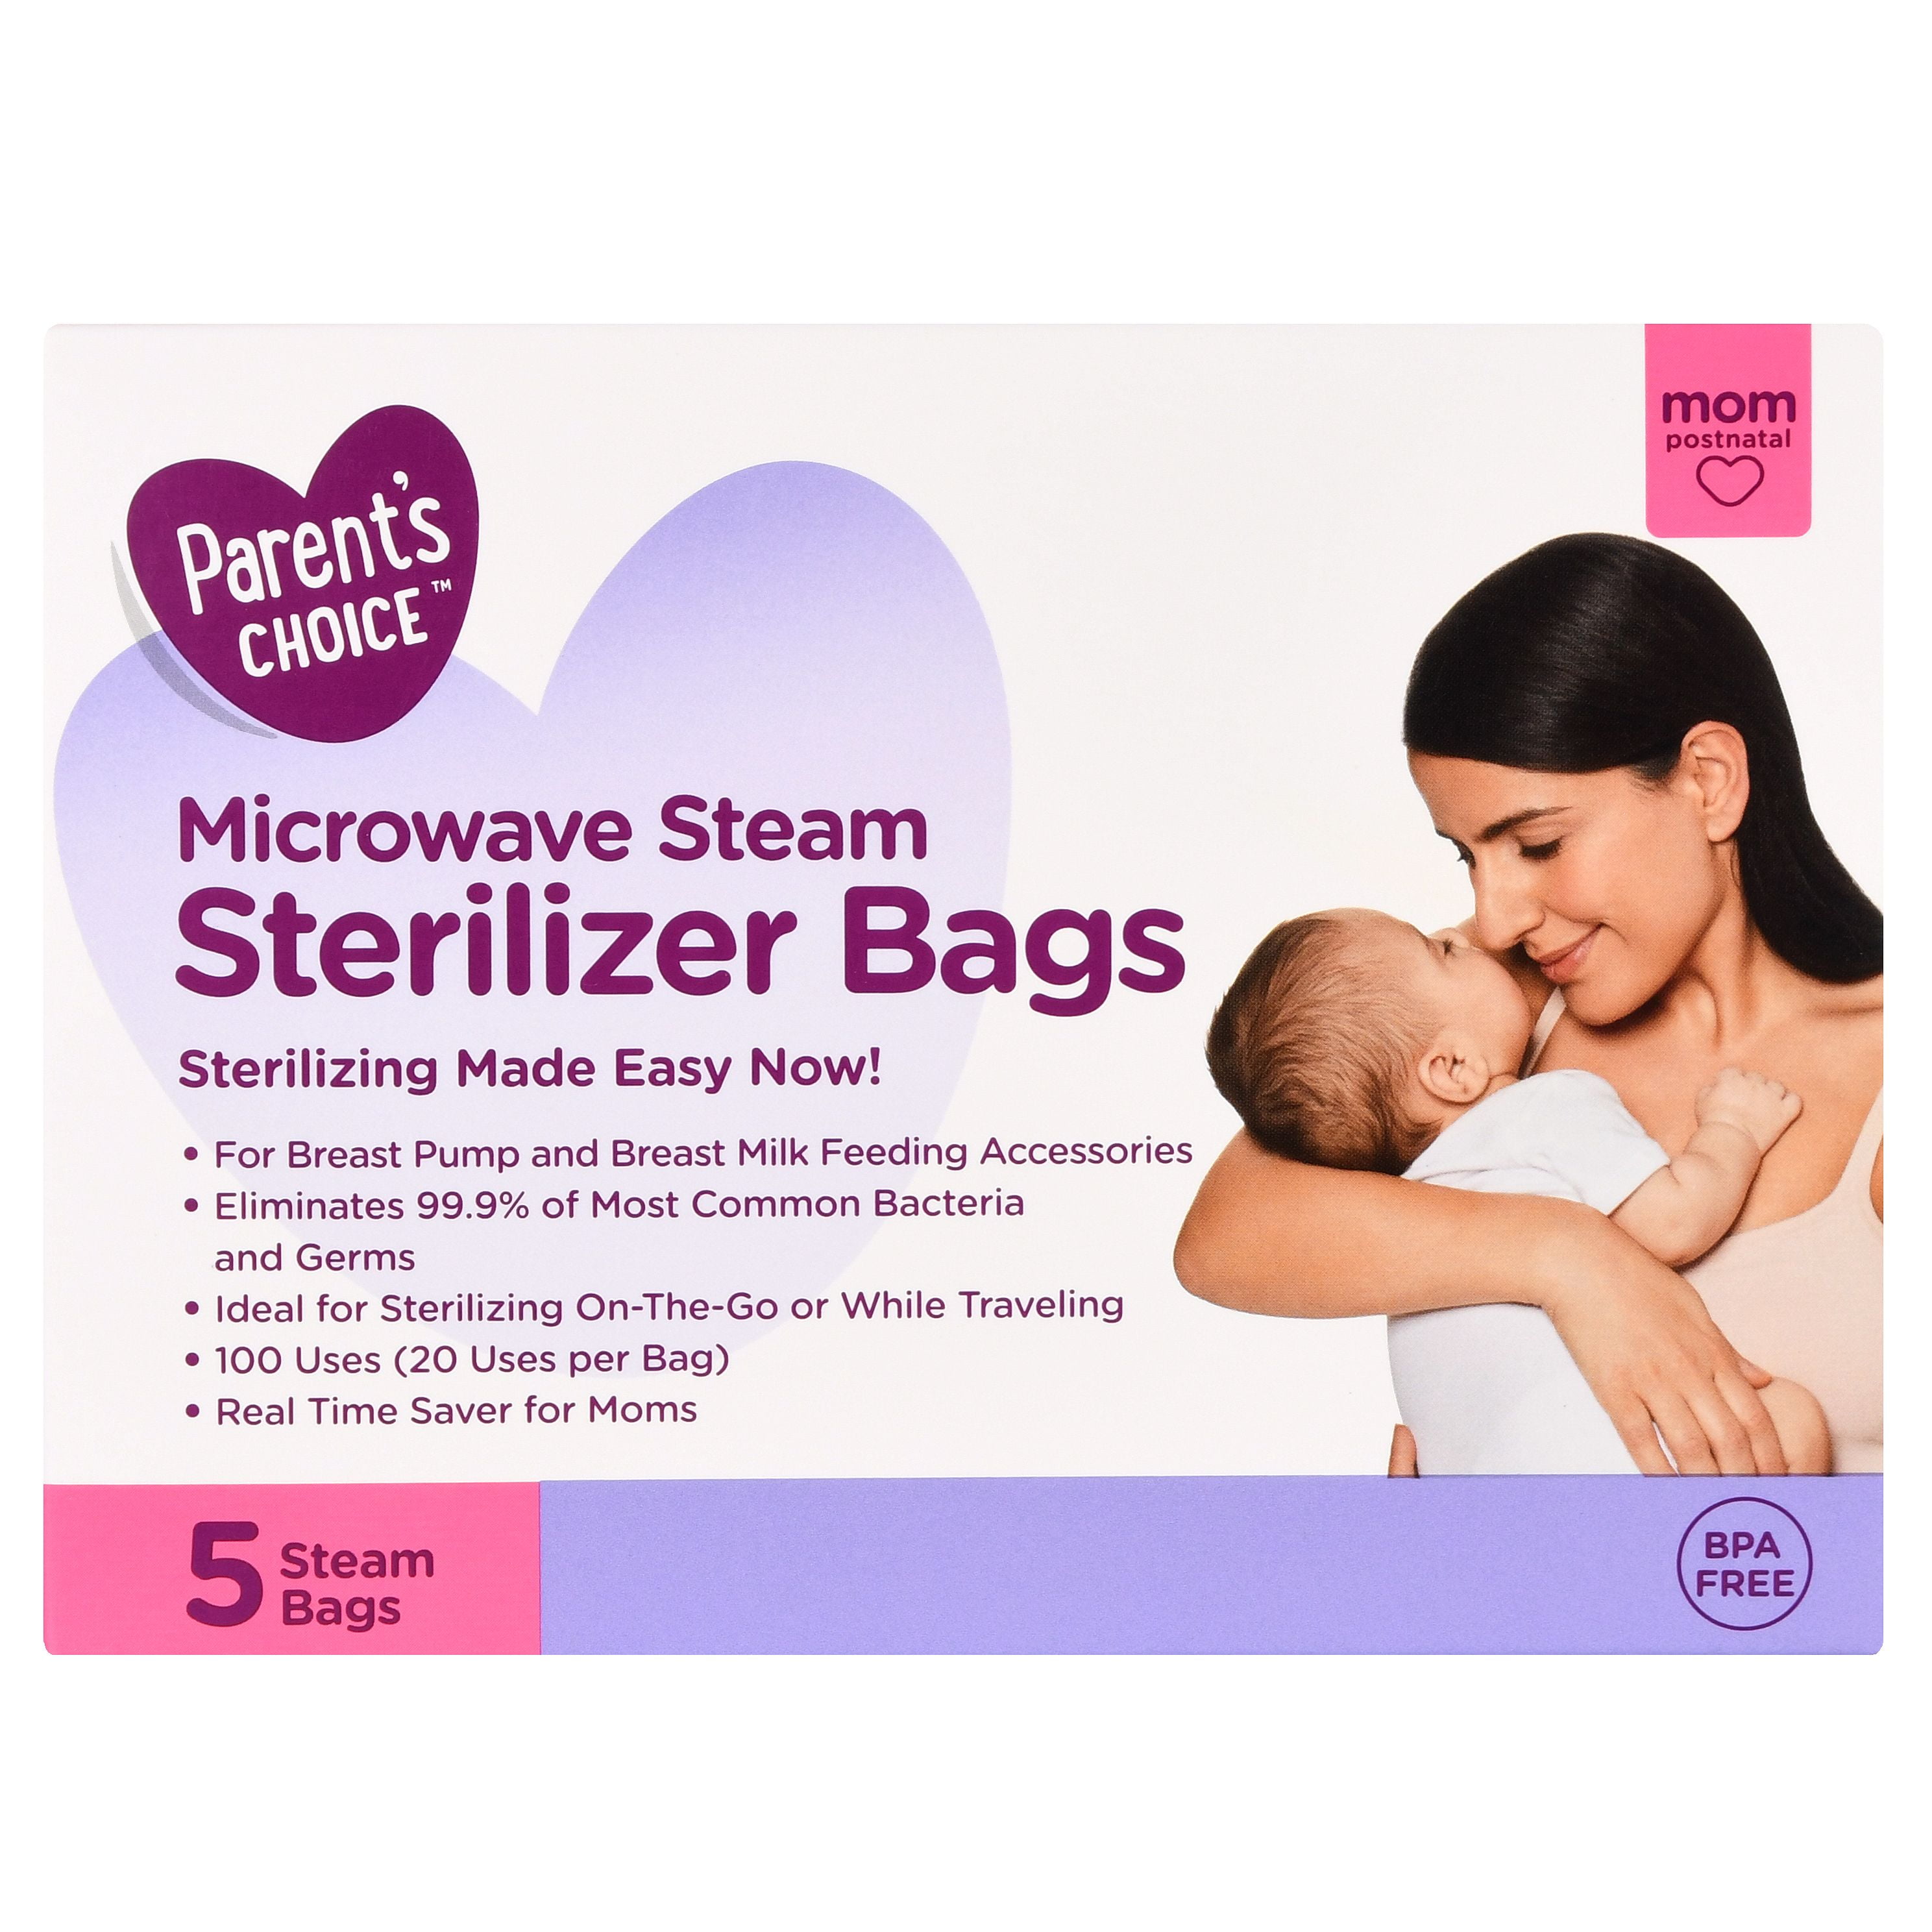 Premium Microwave Sterilizer Bags (20pcs) by Max Strength, Large & Durable Steam Bags for Baby Bottles, Soothers, Teethers & Training Cups, 20 Uses